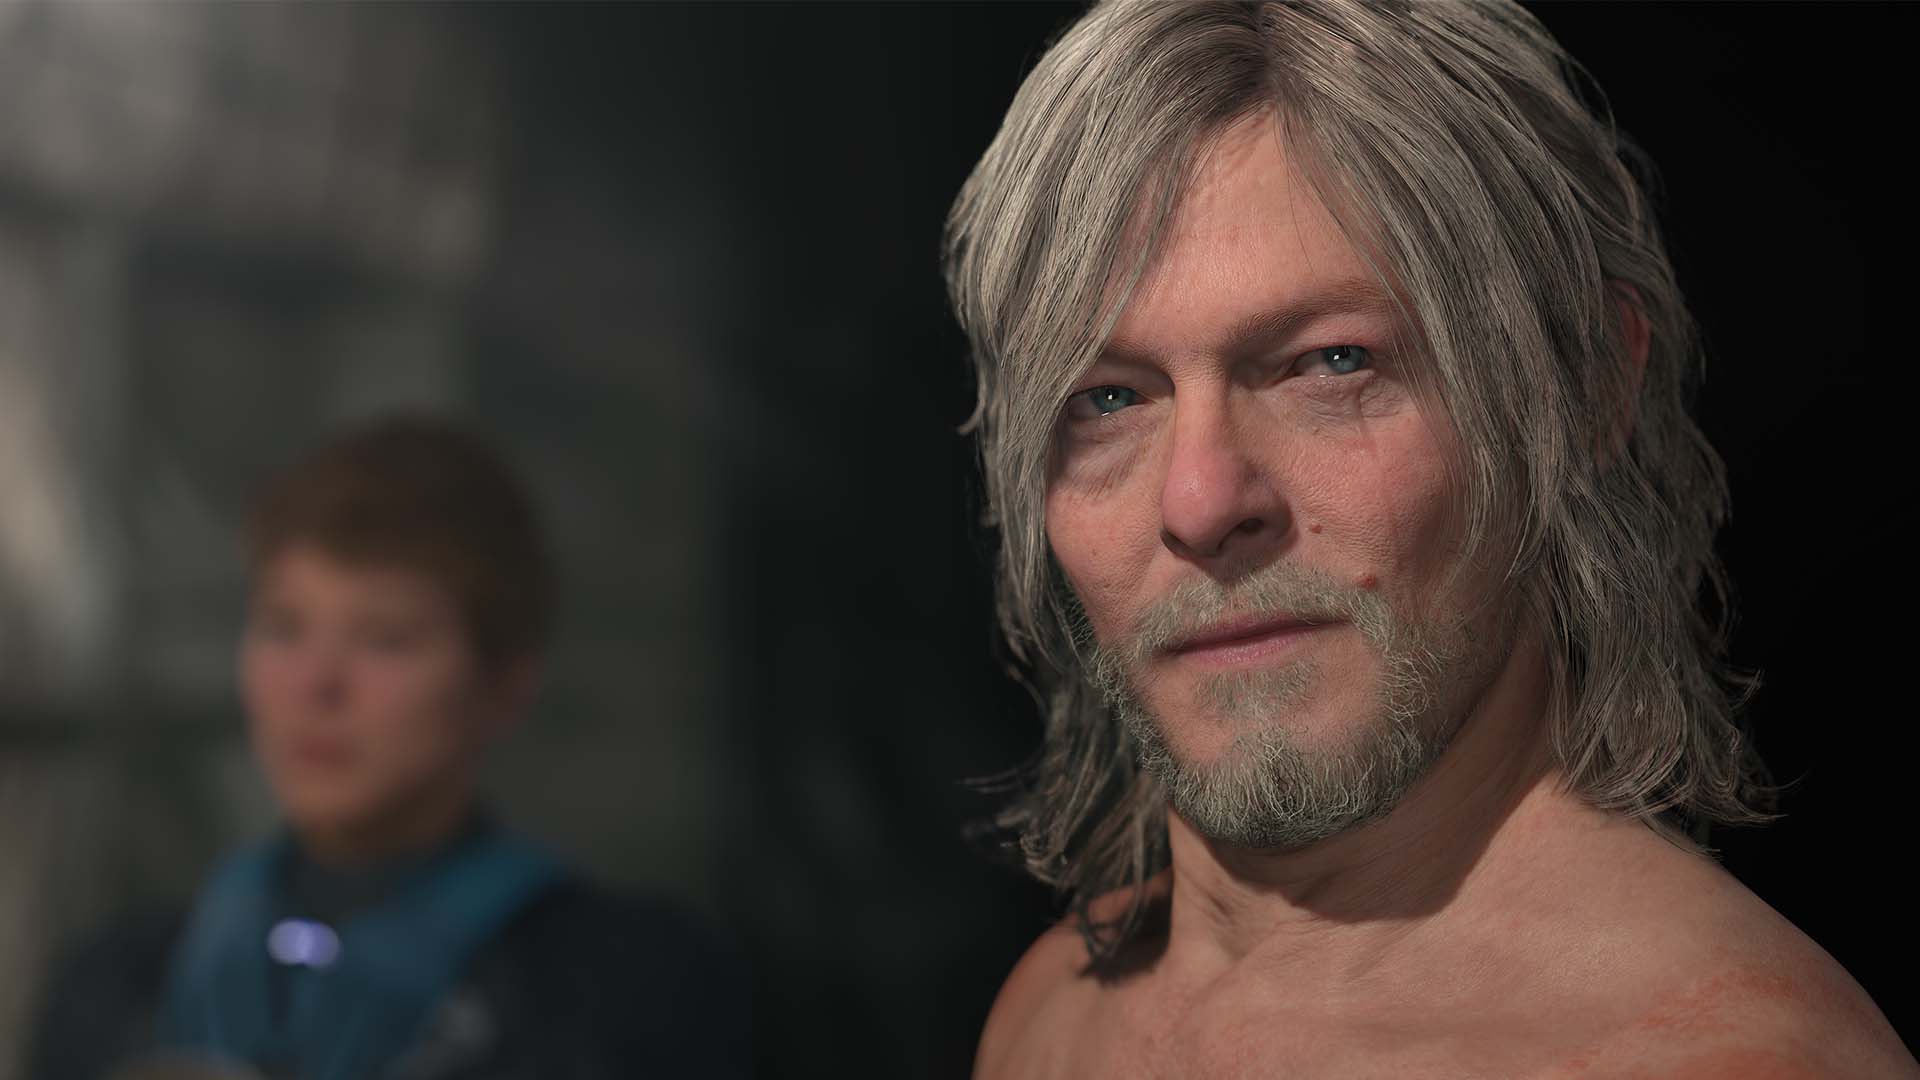 Death Stranding 2 announced and confirmed for PlayStation 5